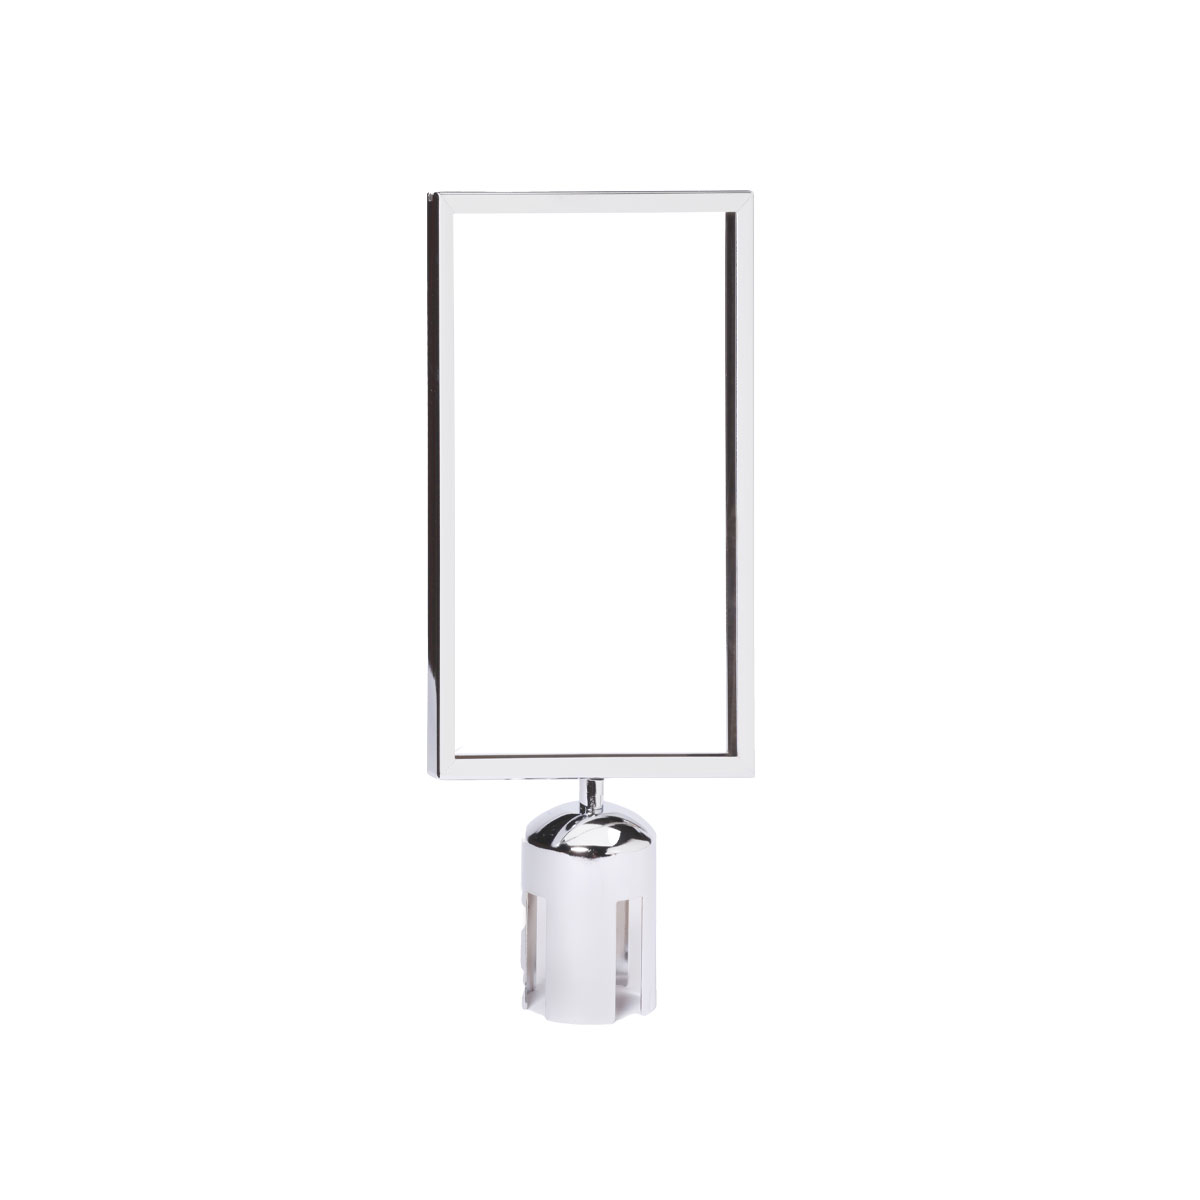 Rope And Post Queue Barrier Sign Frames Polished Chrome Finish